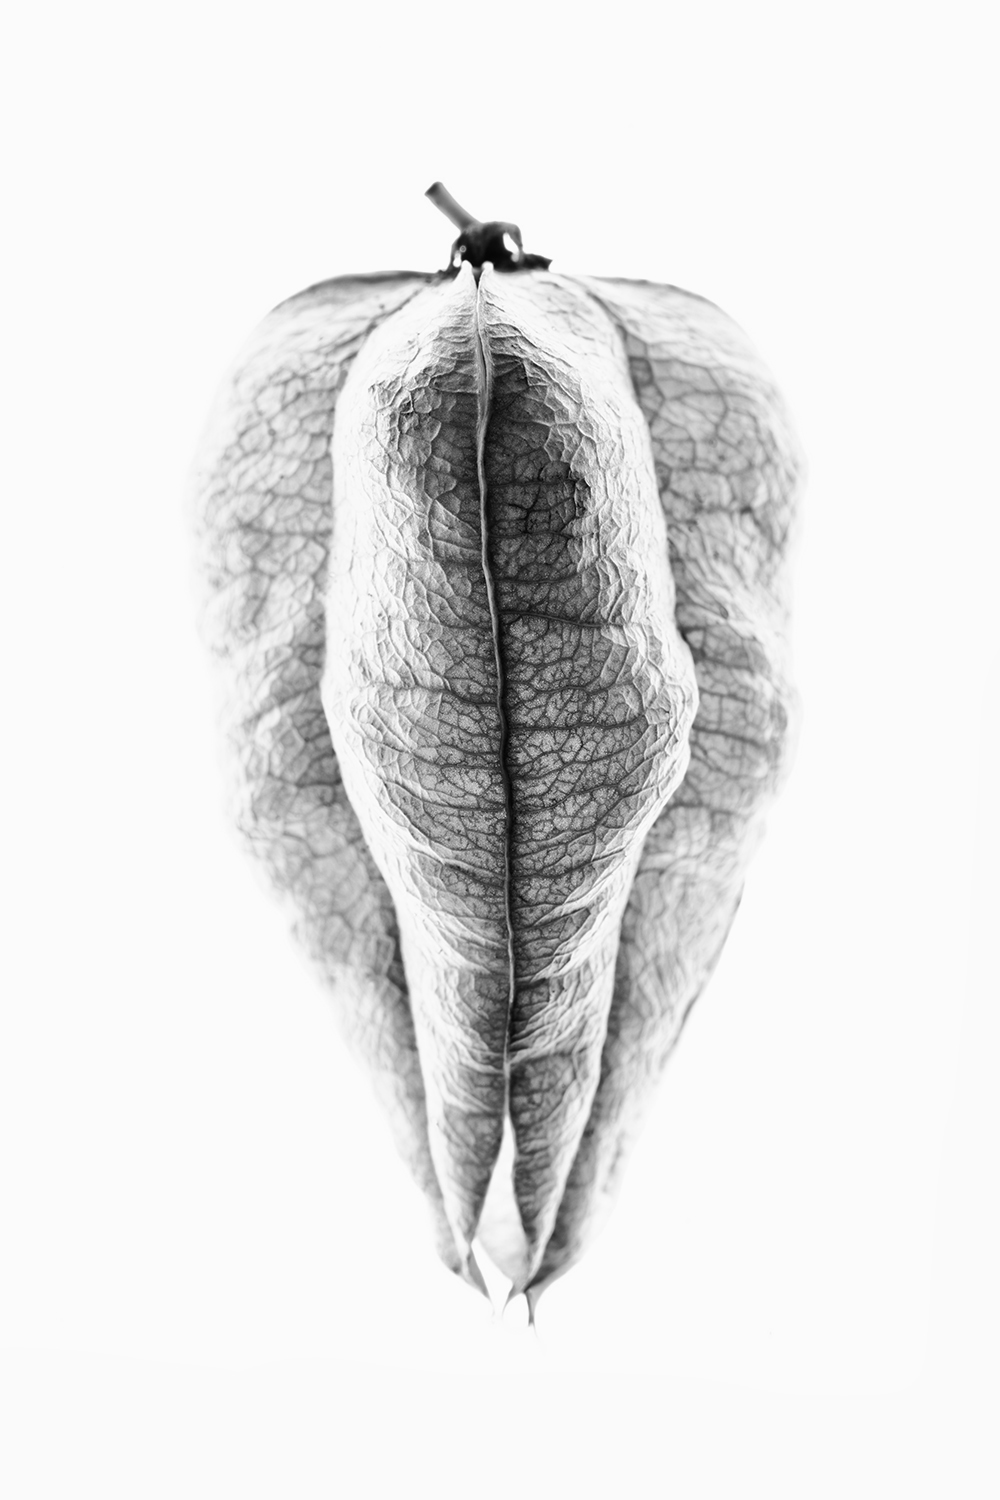 Black and white photograph of the seed pod of the Goldenrain Tree